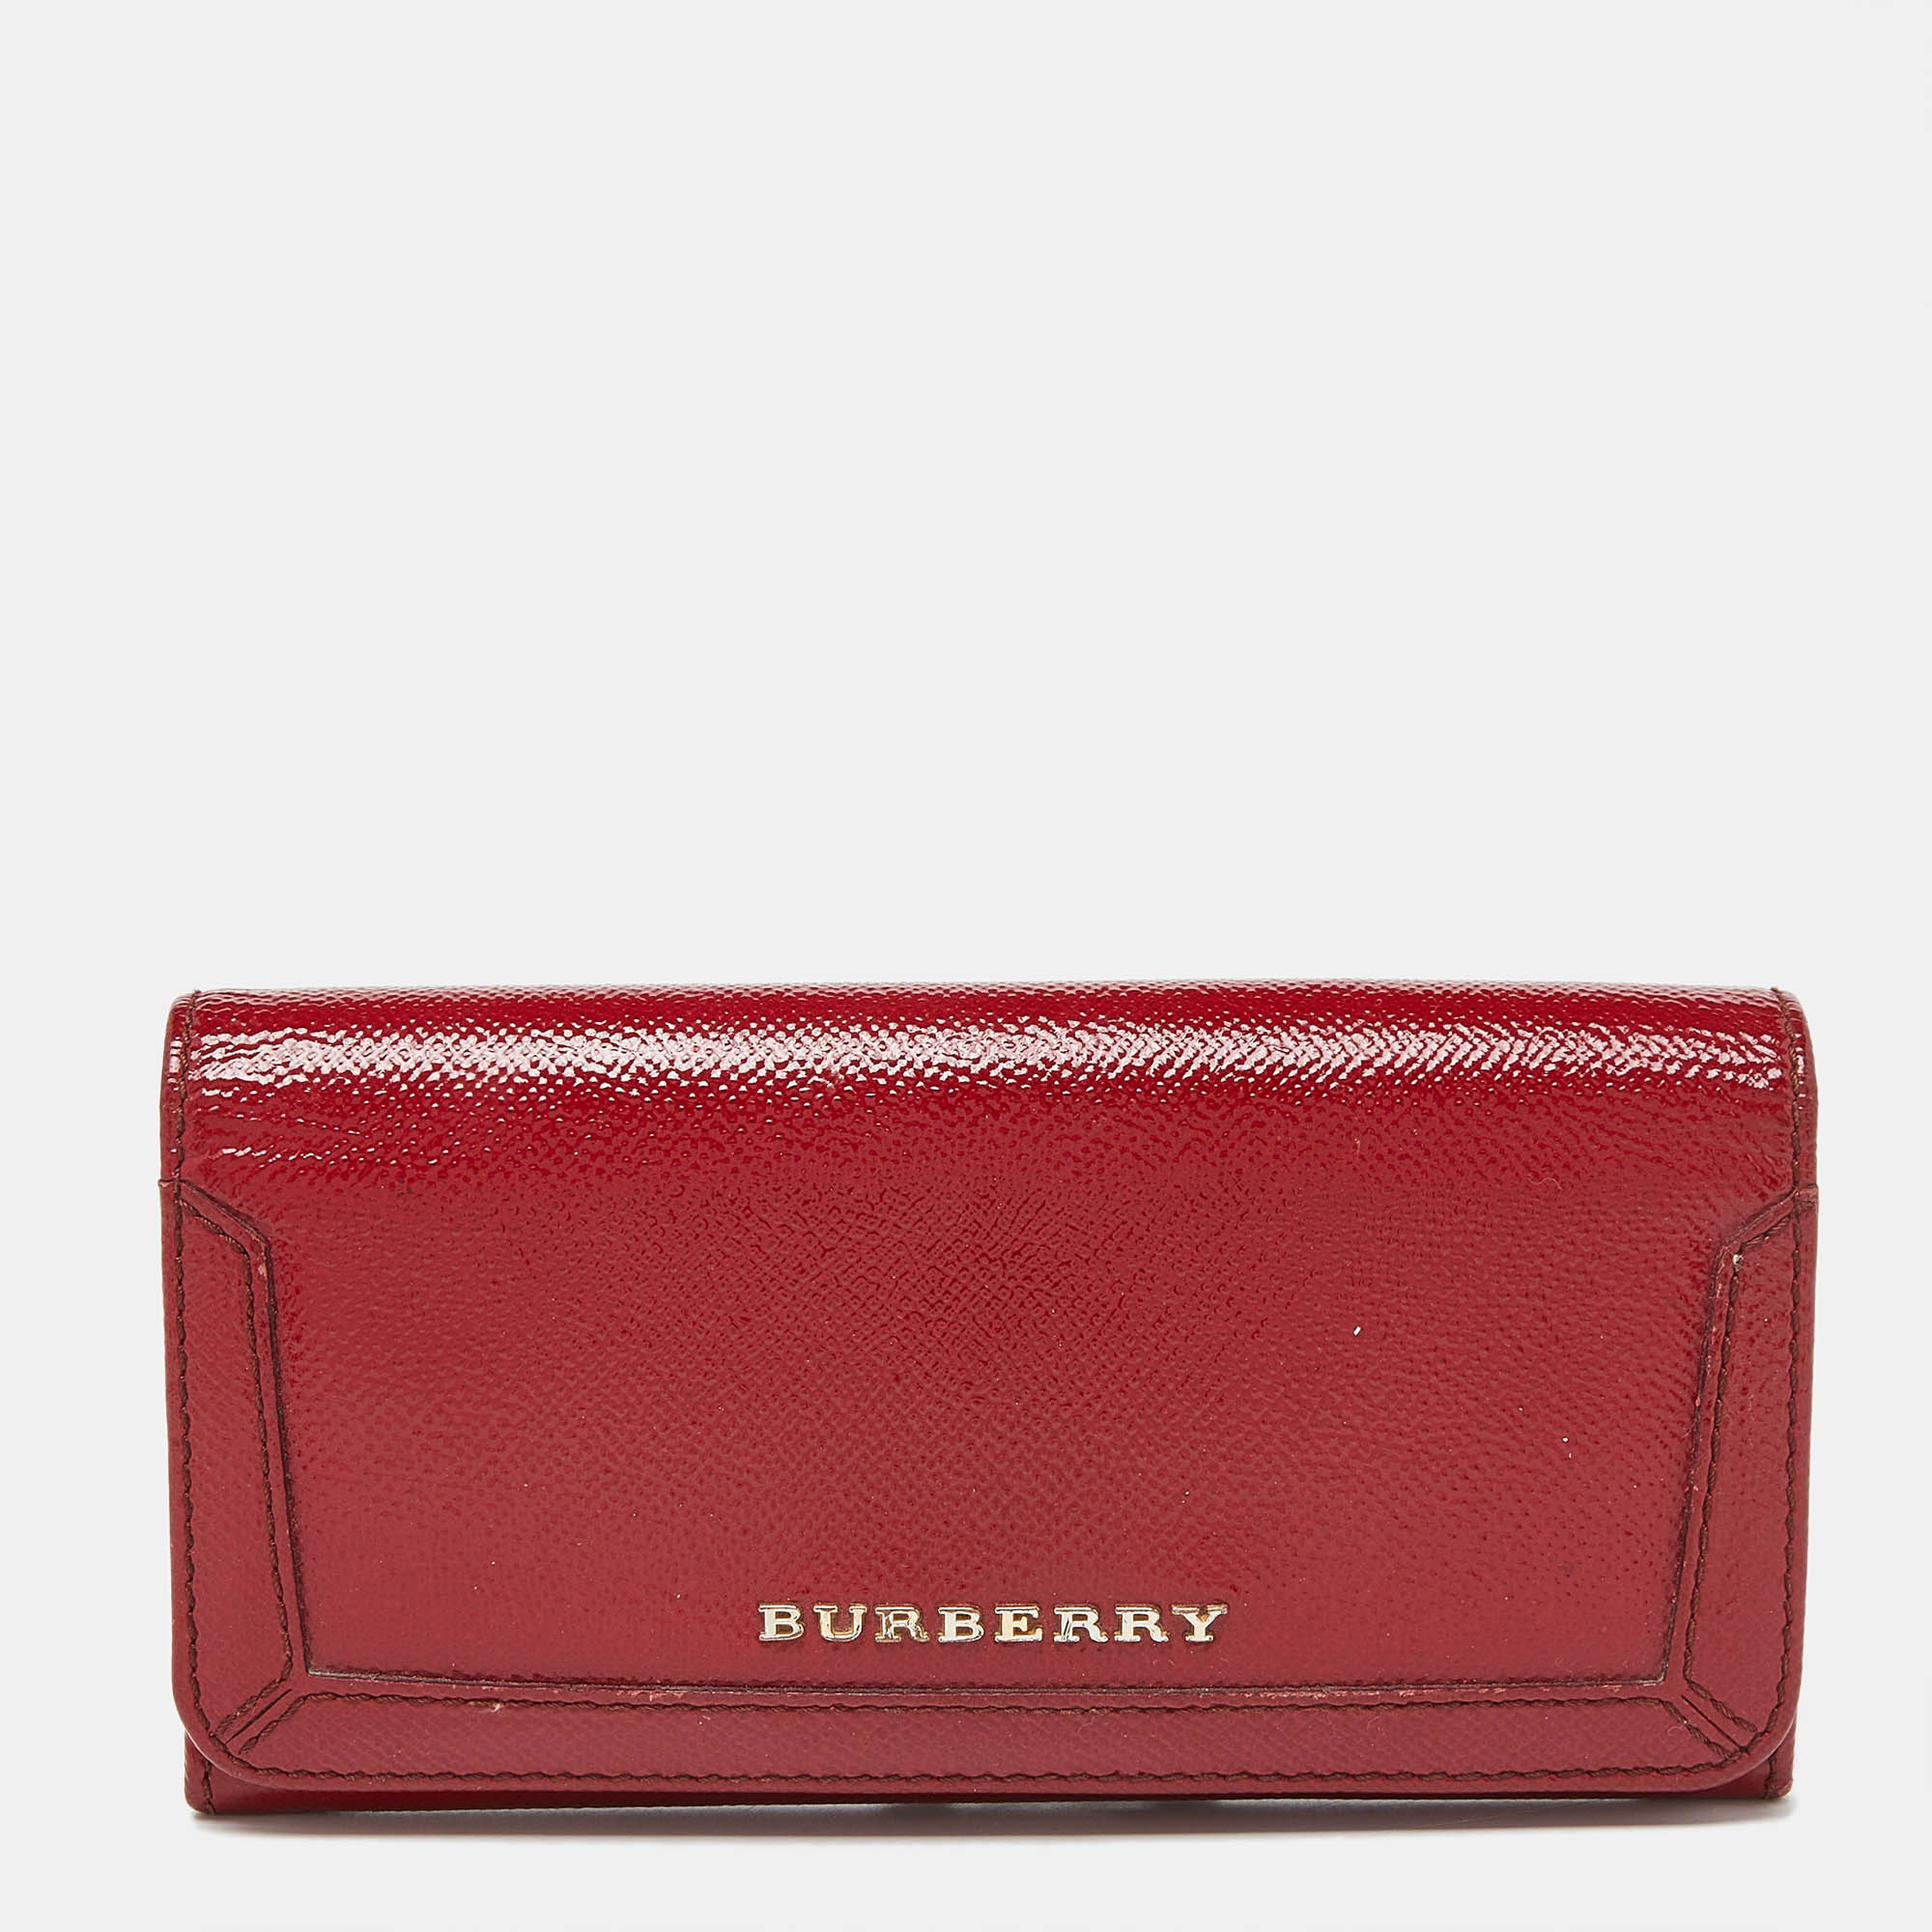 Burberry Novacheck PVC and Patent Leather Flap French Wallet Burberry